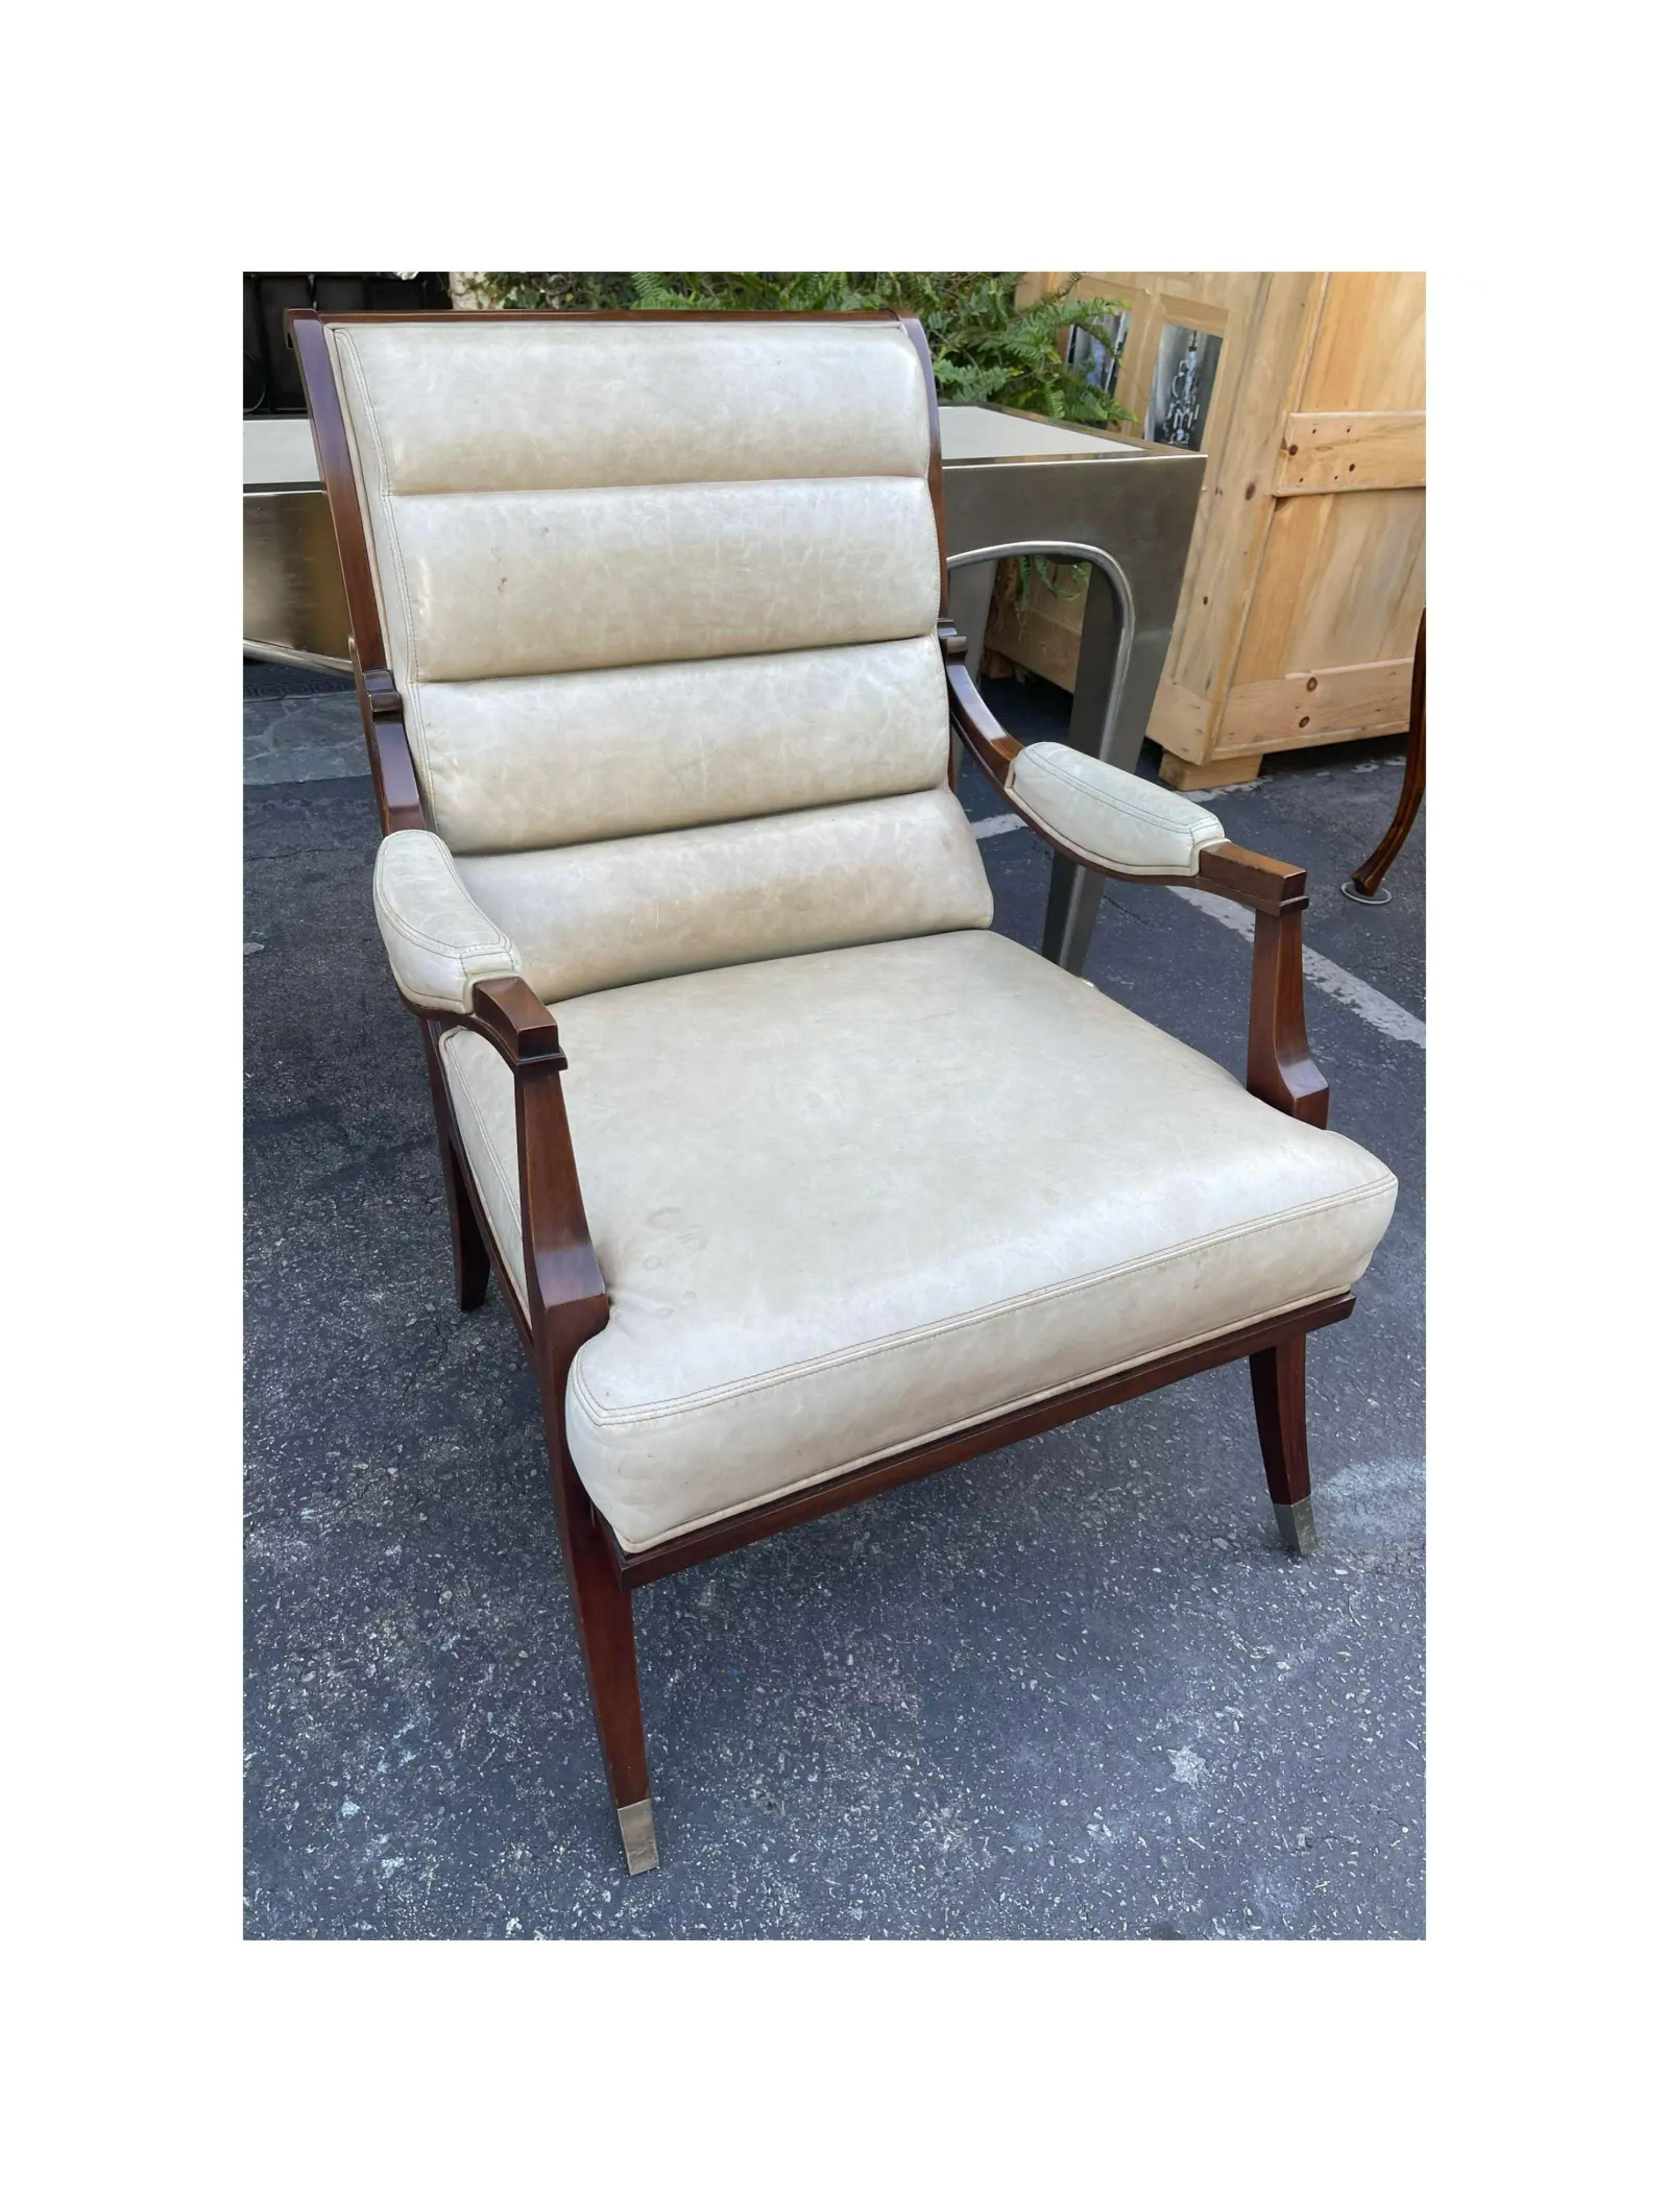 Lucien Rollin Art Deco leather chair. It features an unusual channel tufted back and a dramatic form.

Additional information: 
Materials: Leather
Color: Beige
Brand: William Switzer
Designer: Lucien Rollin
Period: 2000 - 2009
Styles: Art